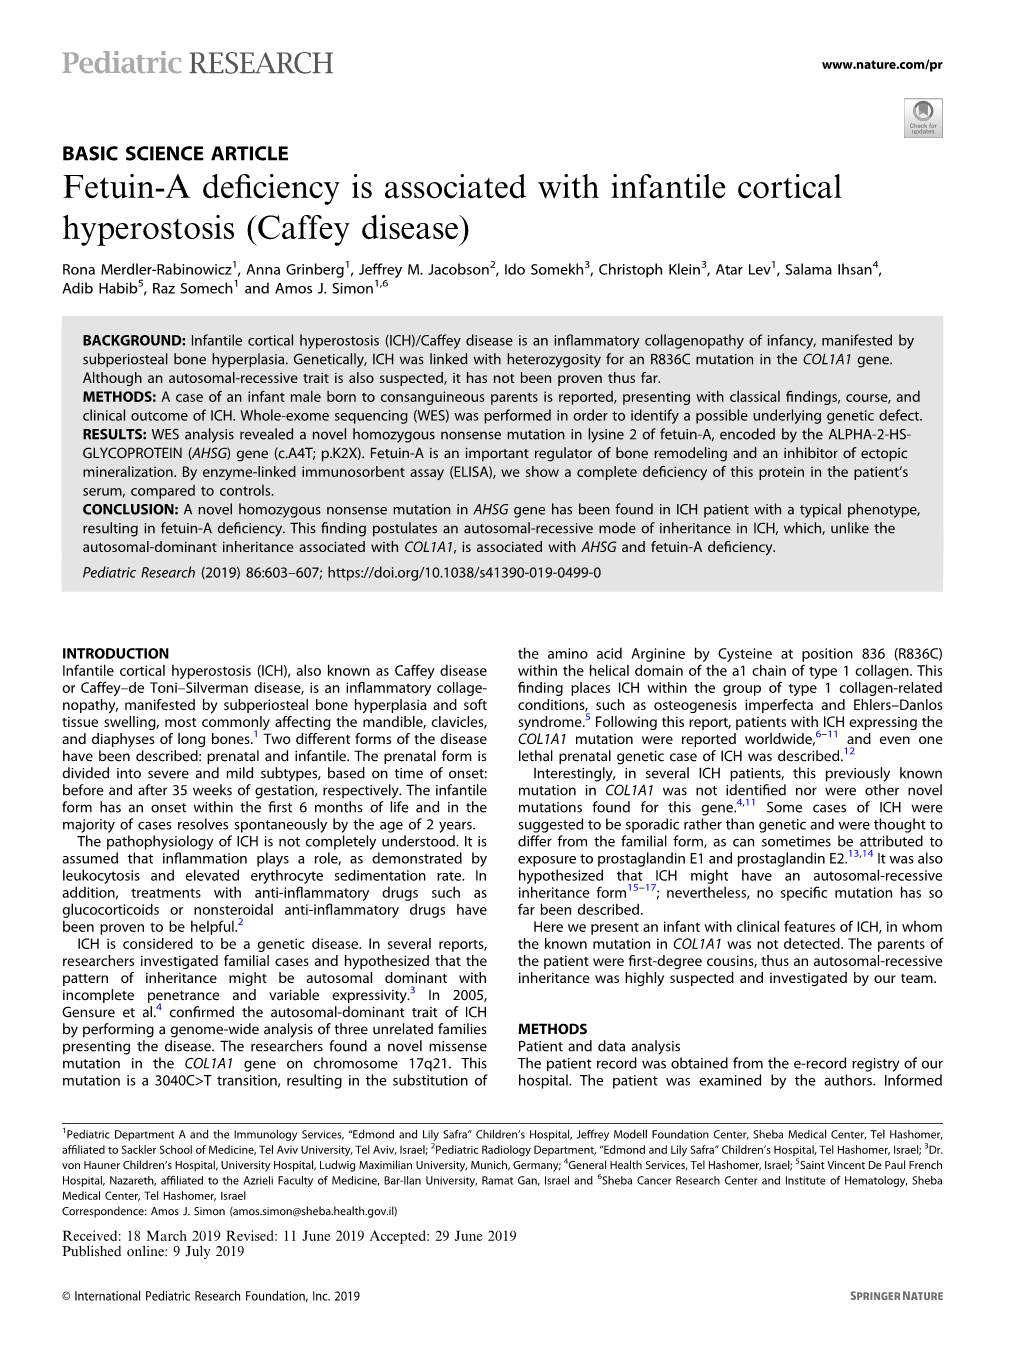 Fetuin-A Deficiency Is Associated with Infantile Cortical Hyperostosis